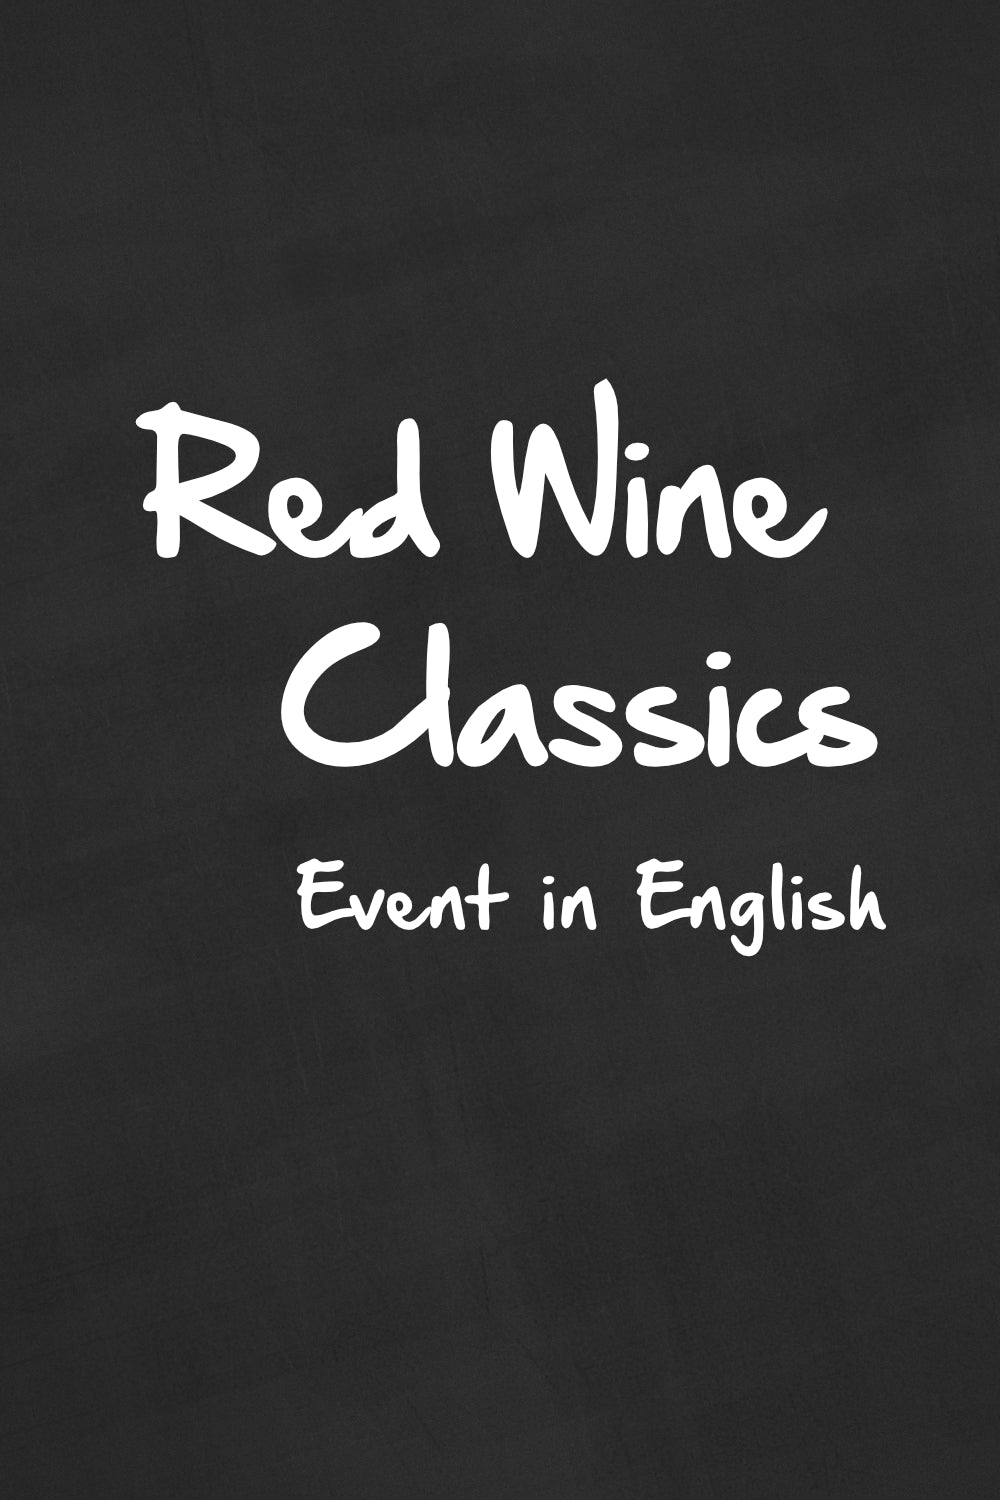 Red Wine Tasting: experience red wines